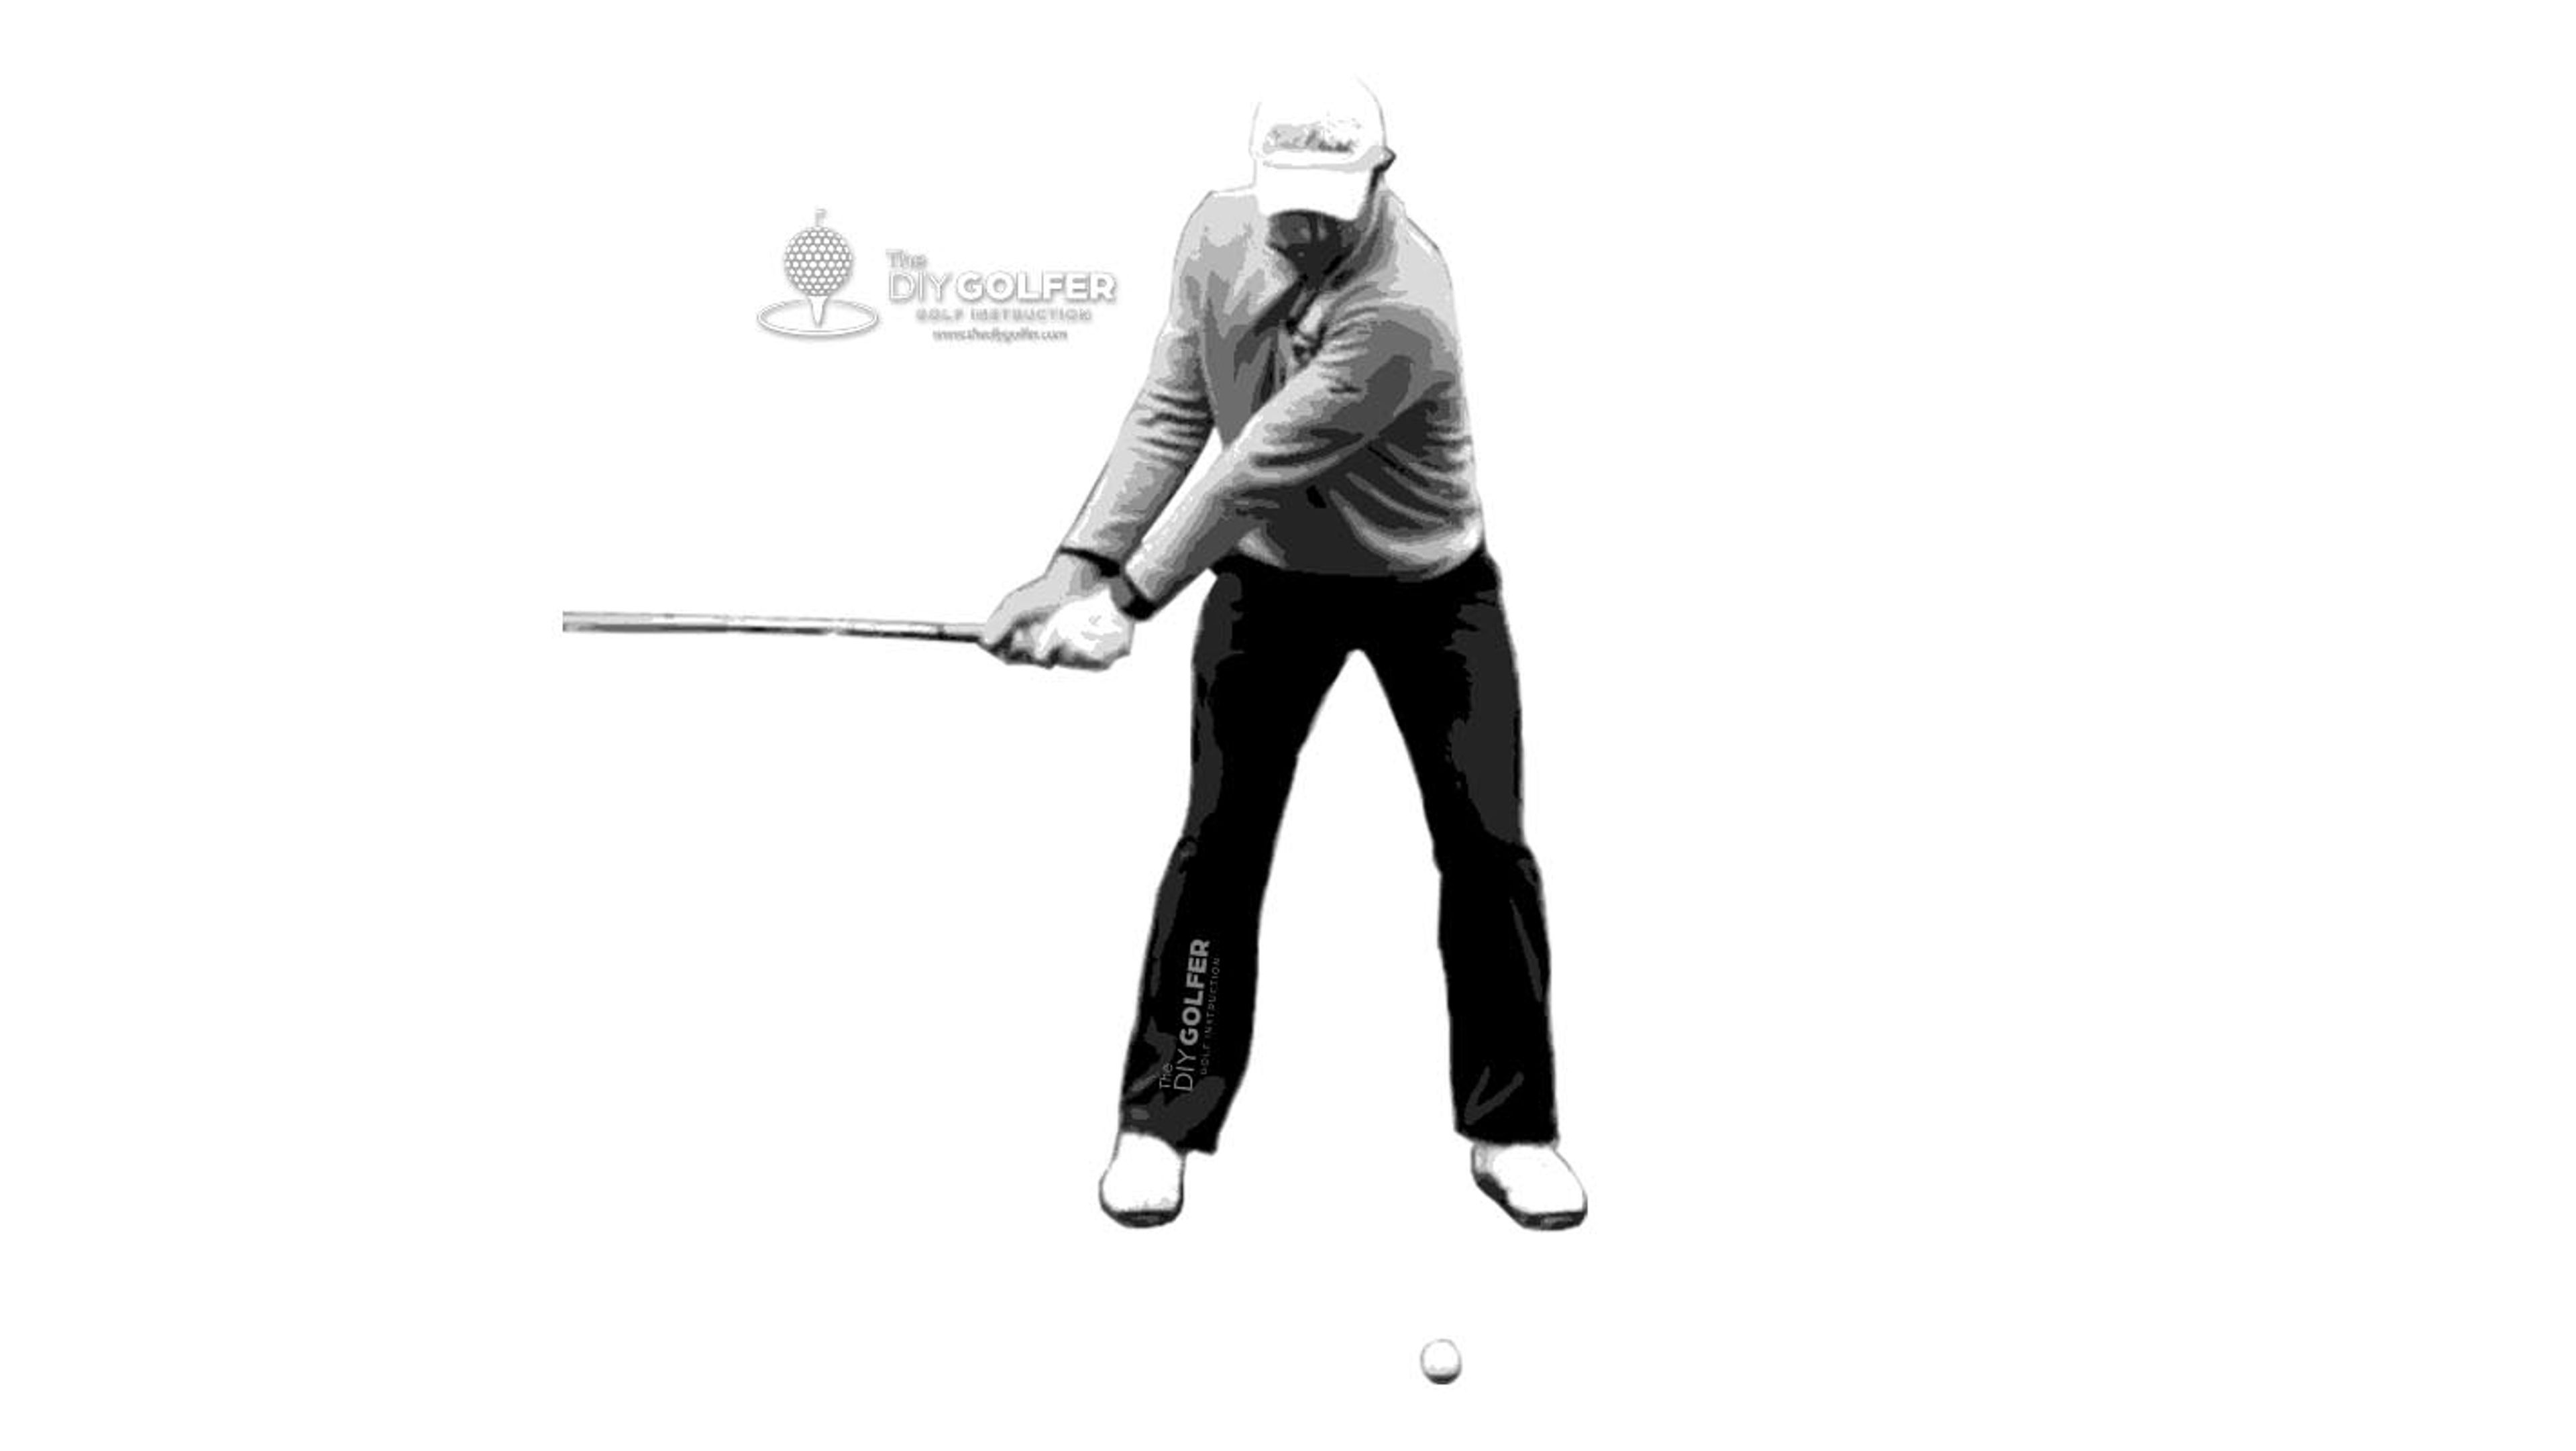 A shareable image from The DIY Golfer